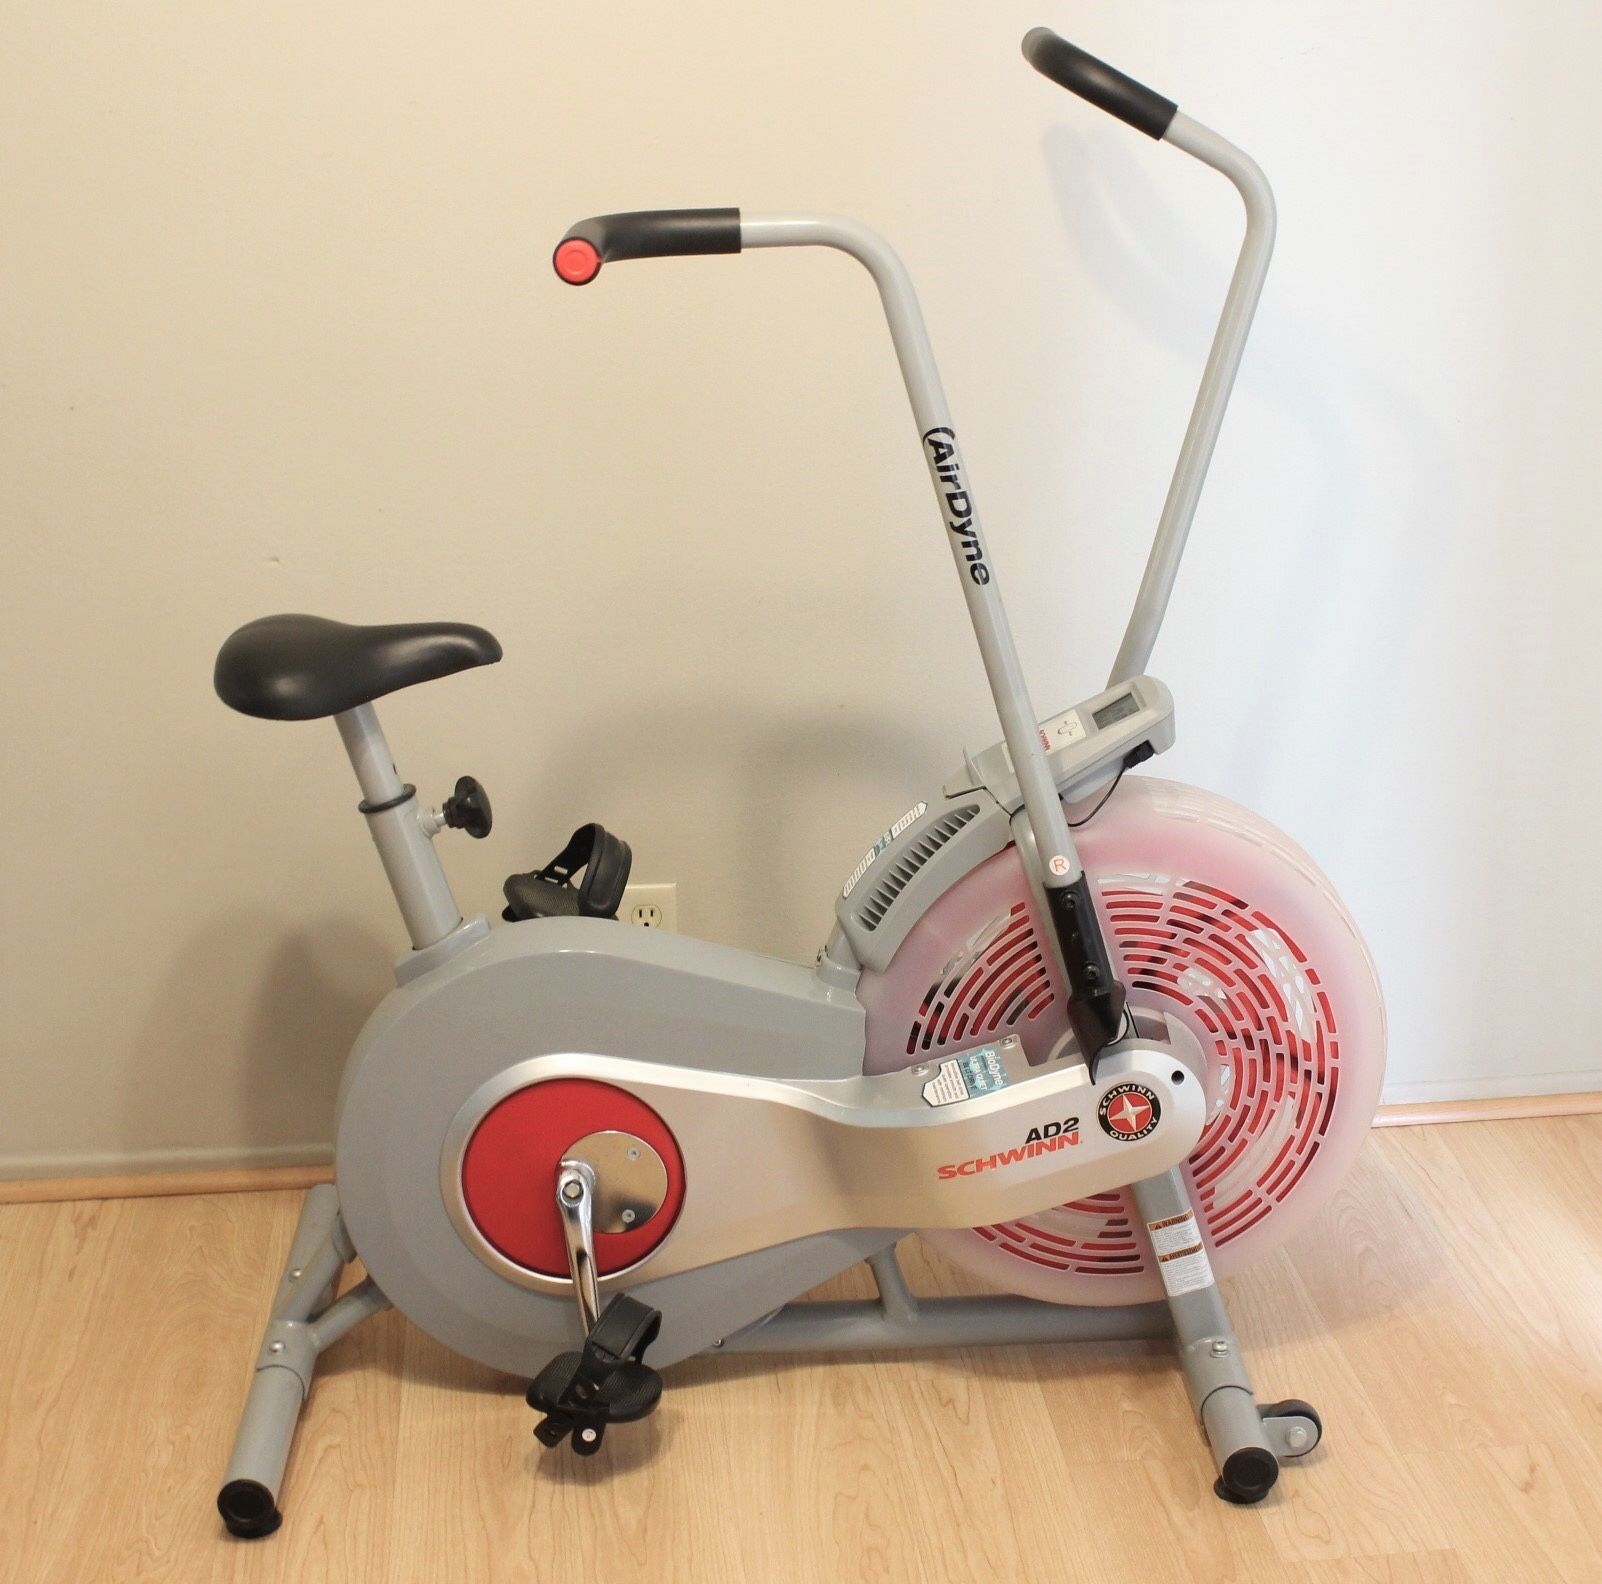 Schwinn Airdyne AD2 Assault Bike Indoor Stationary Fan Bicycle Cycling Exercise Fitness Crossfit